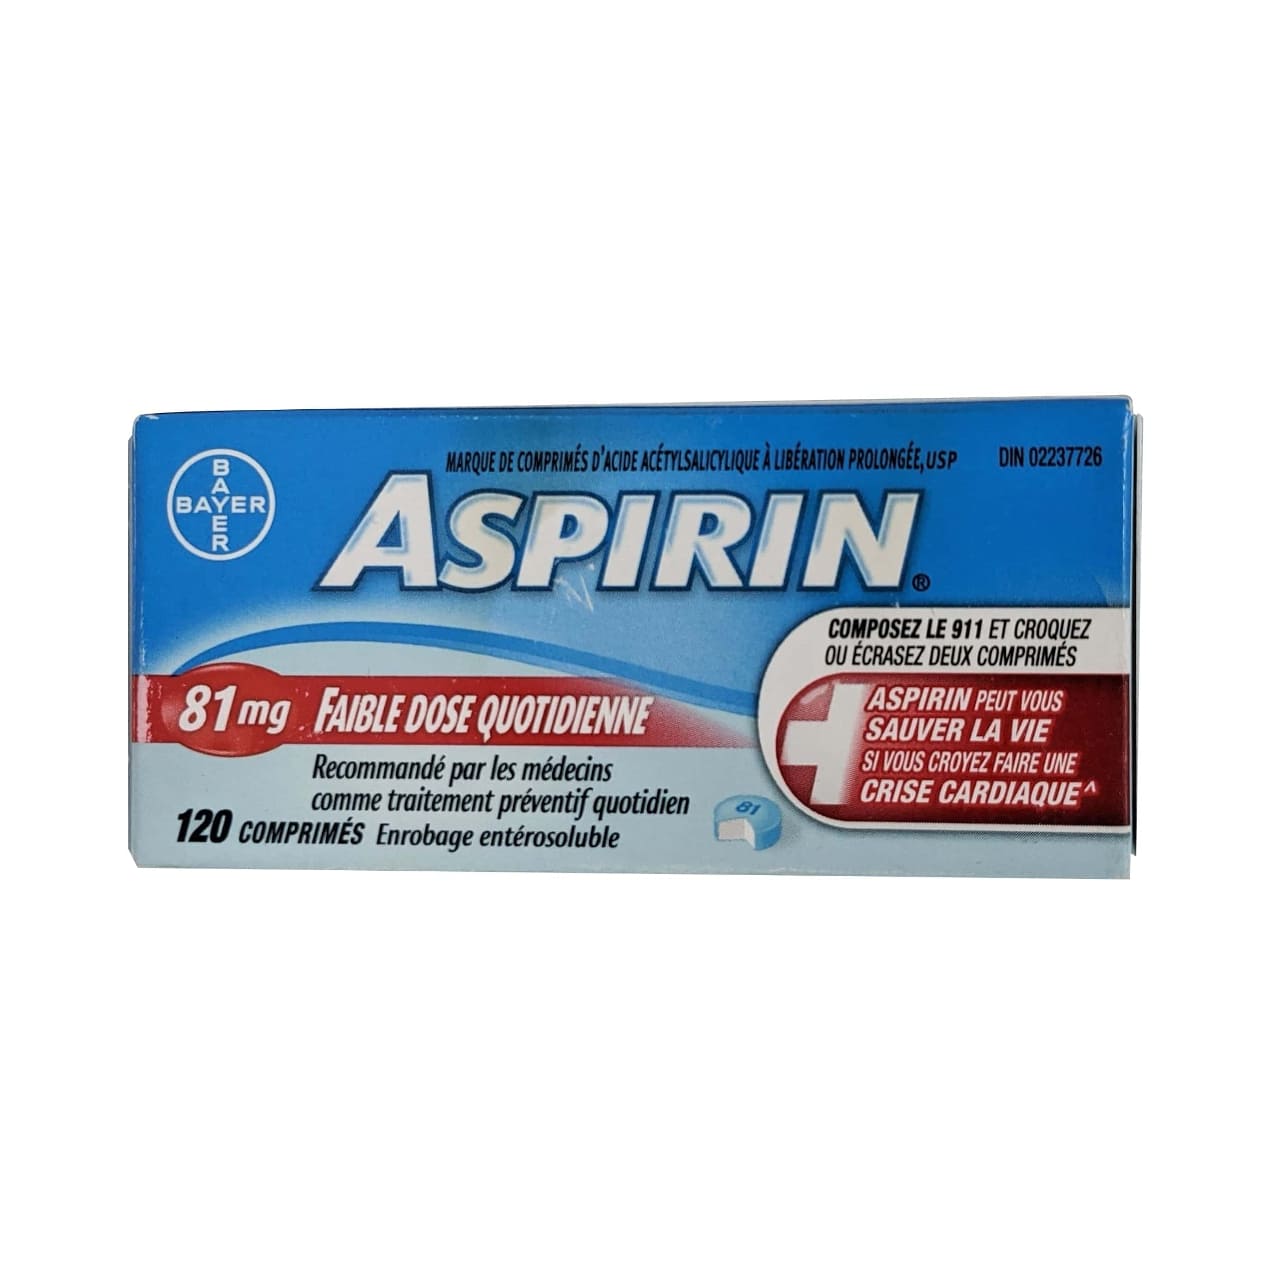 Product package for Aspirin Acetylsalicylic Acid 81mg Low Dose Delayed Release Tablets 120 pack in French